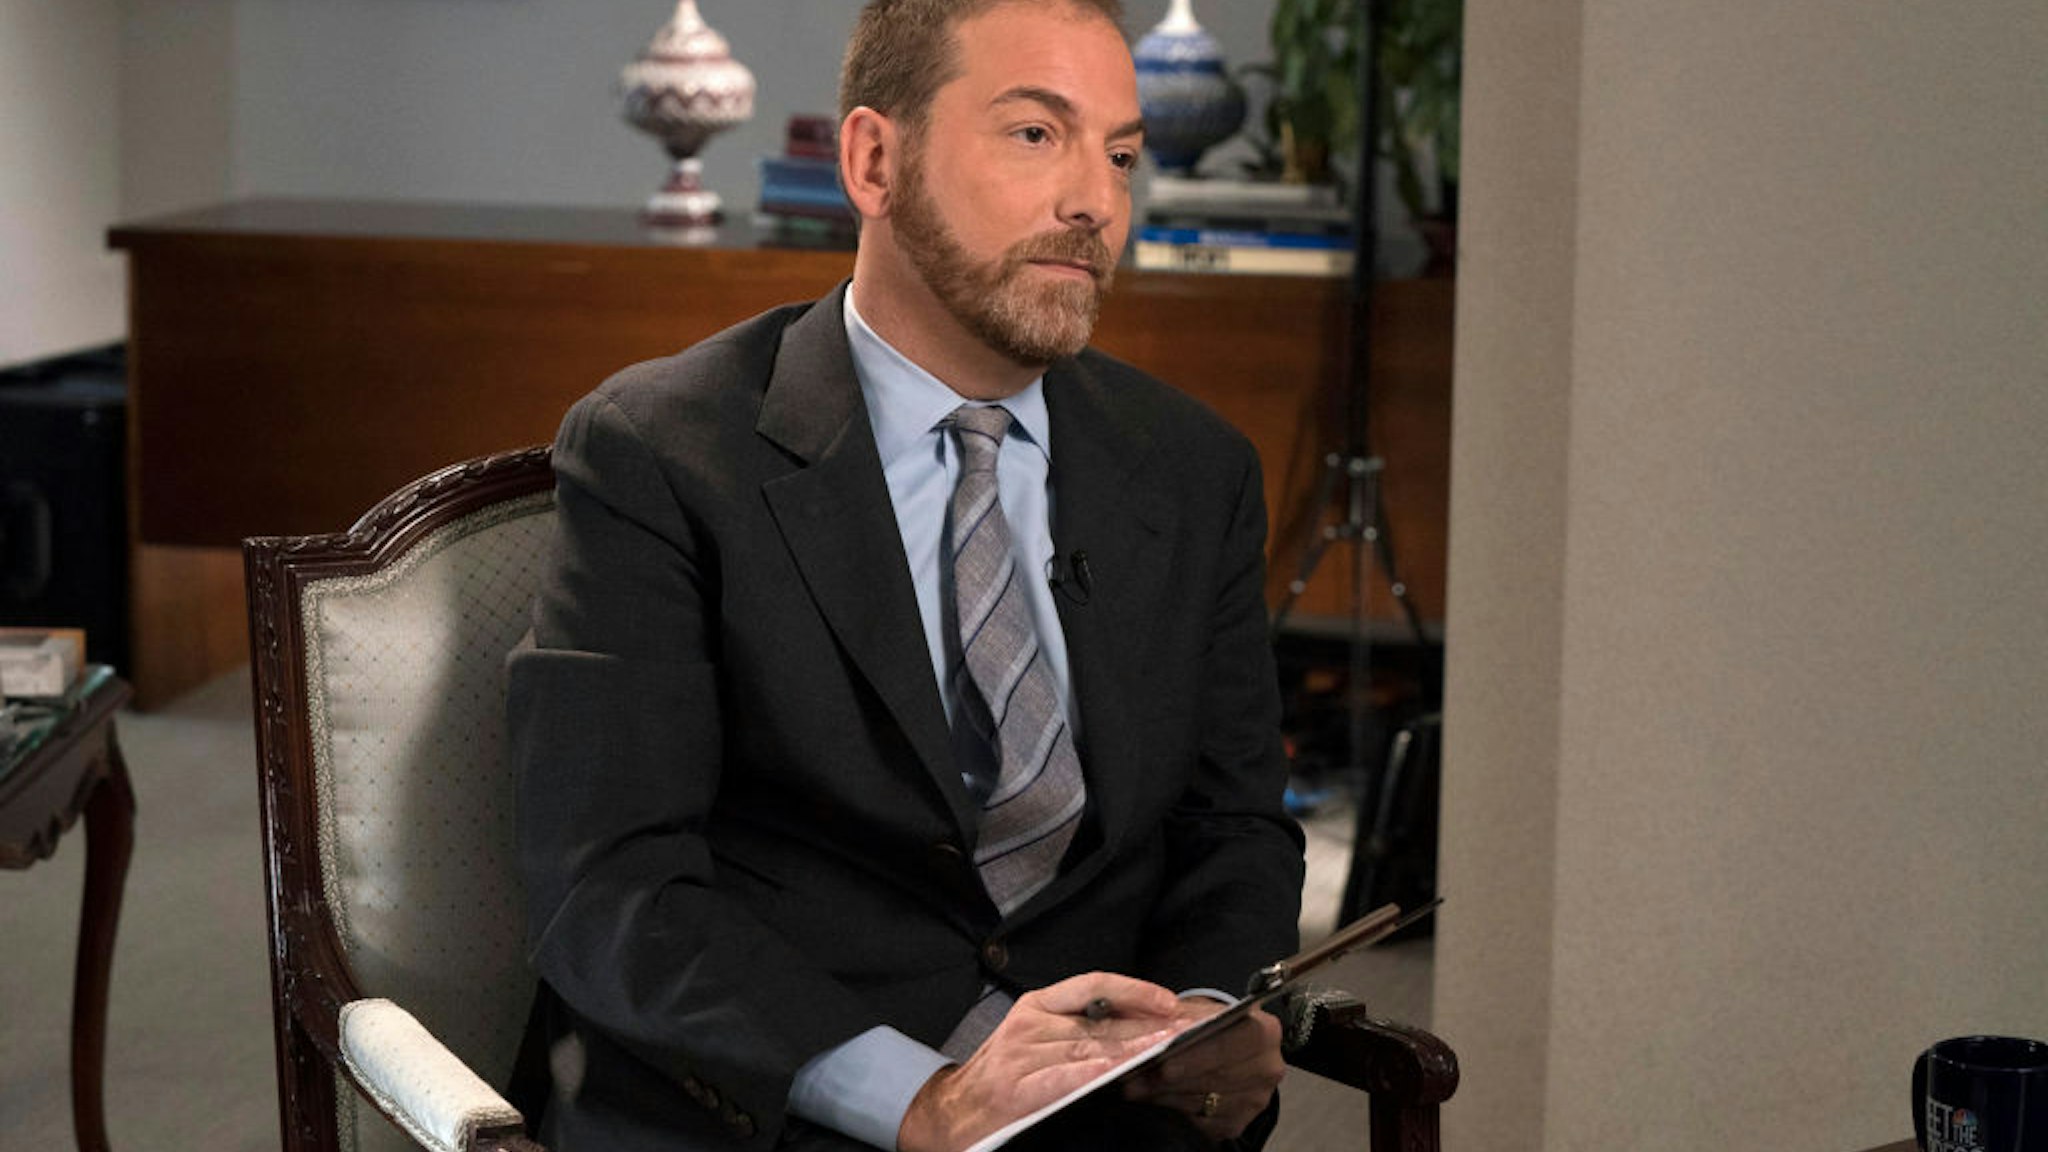 Chuck Todd interviews Iran FM Javad ZarifI in the Iran Mission to the United Nations in New York City on September 28, 2019 .